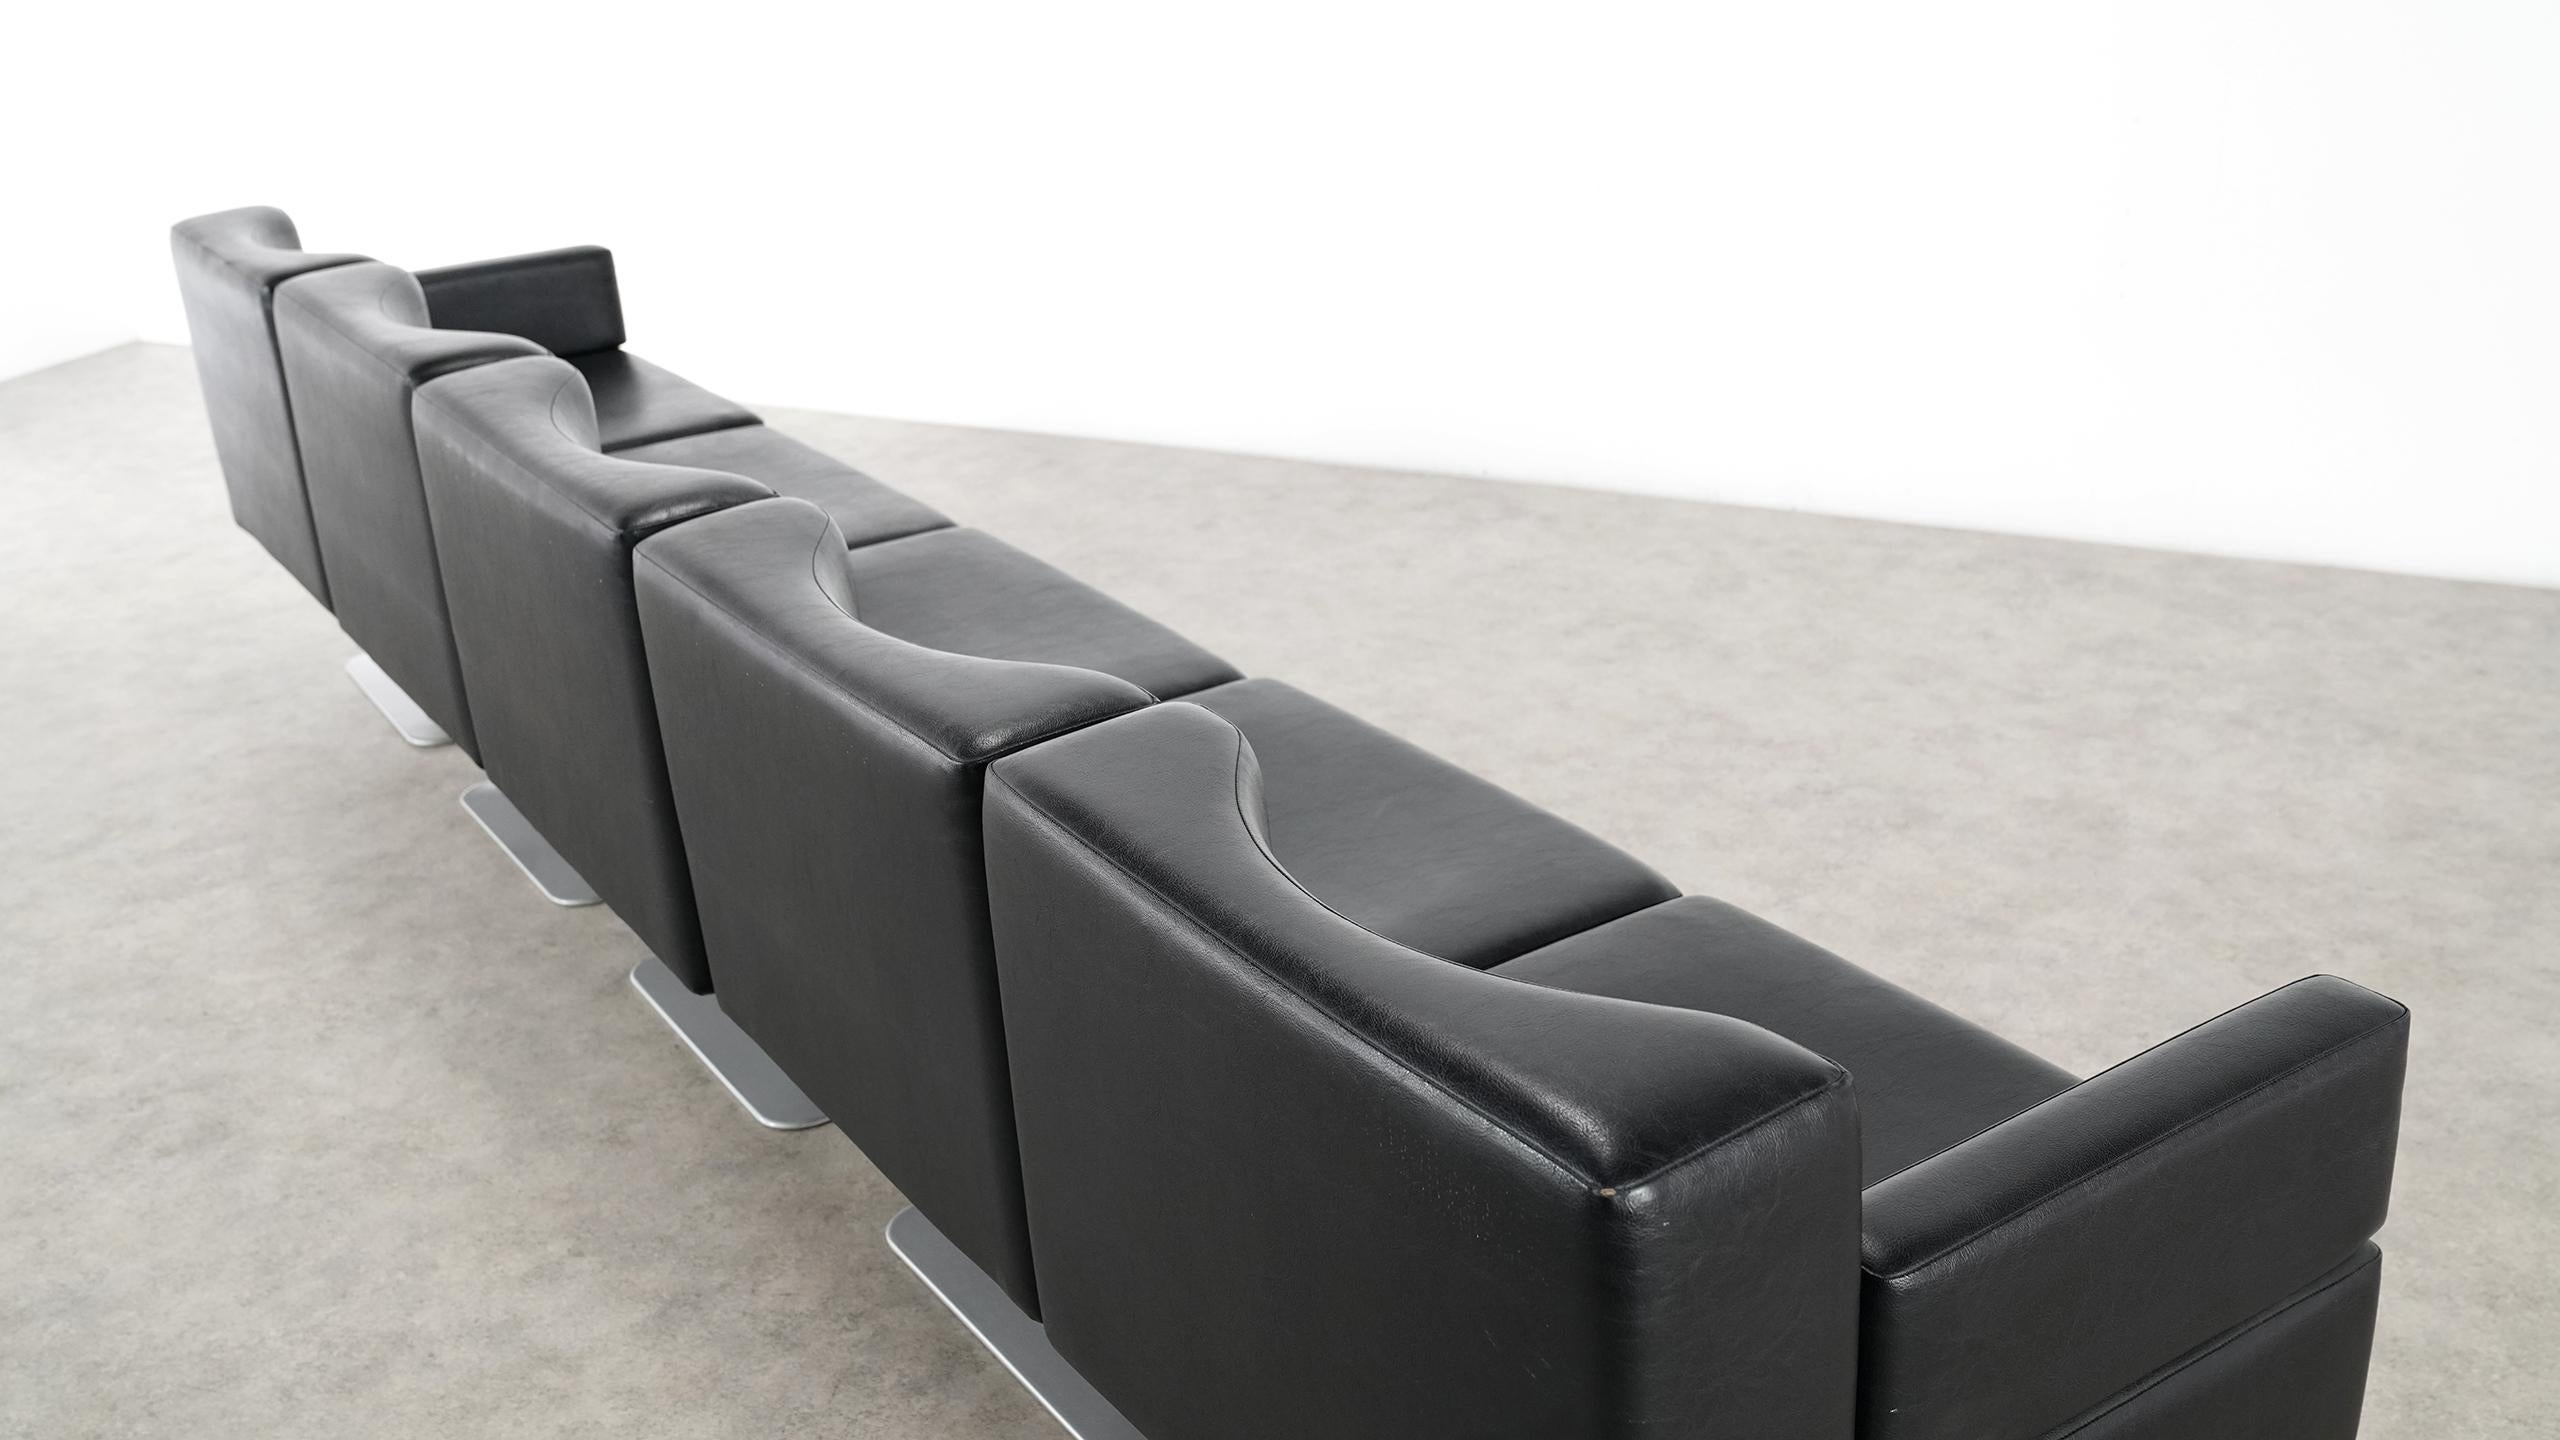 Modular Lounge Sofa or Chair or Table Set by Herbert Hirche 1974 Mauser, Germany 5